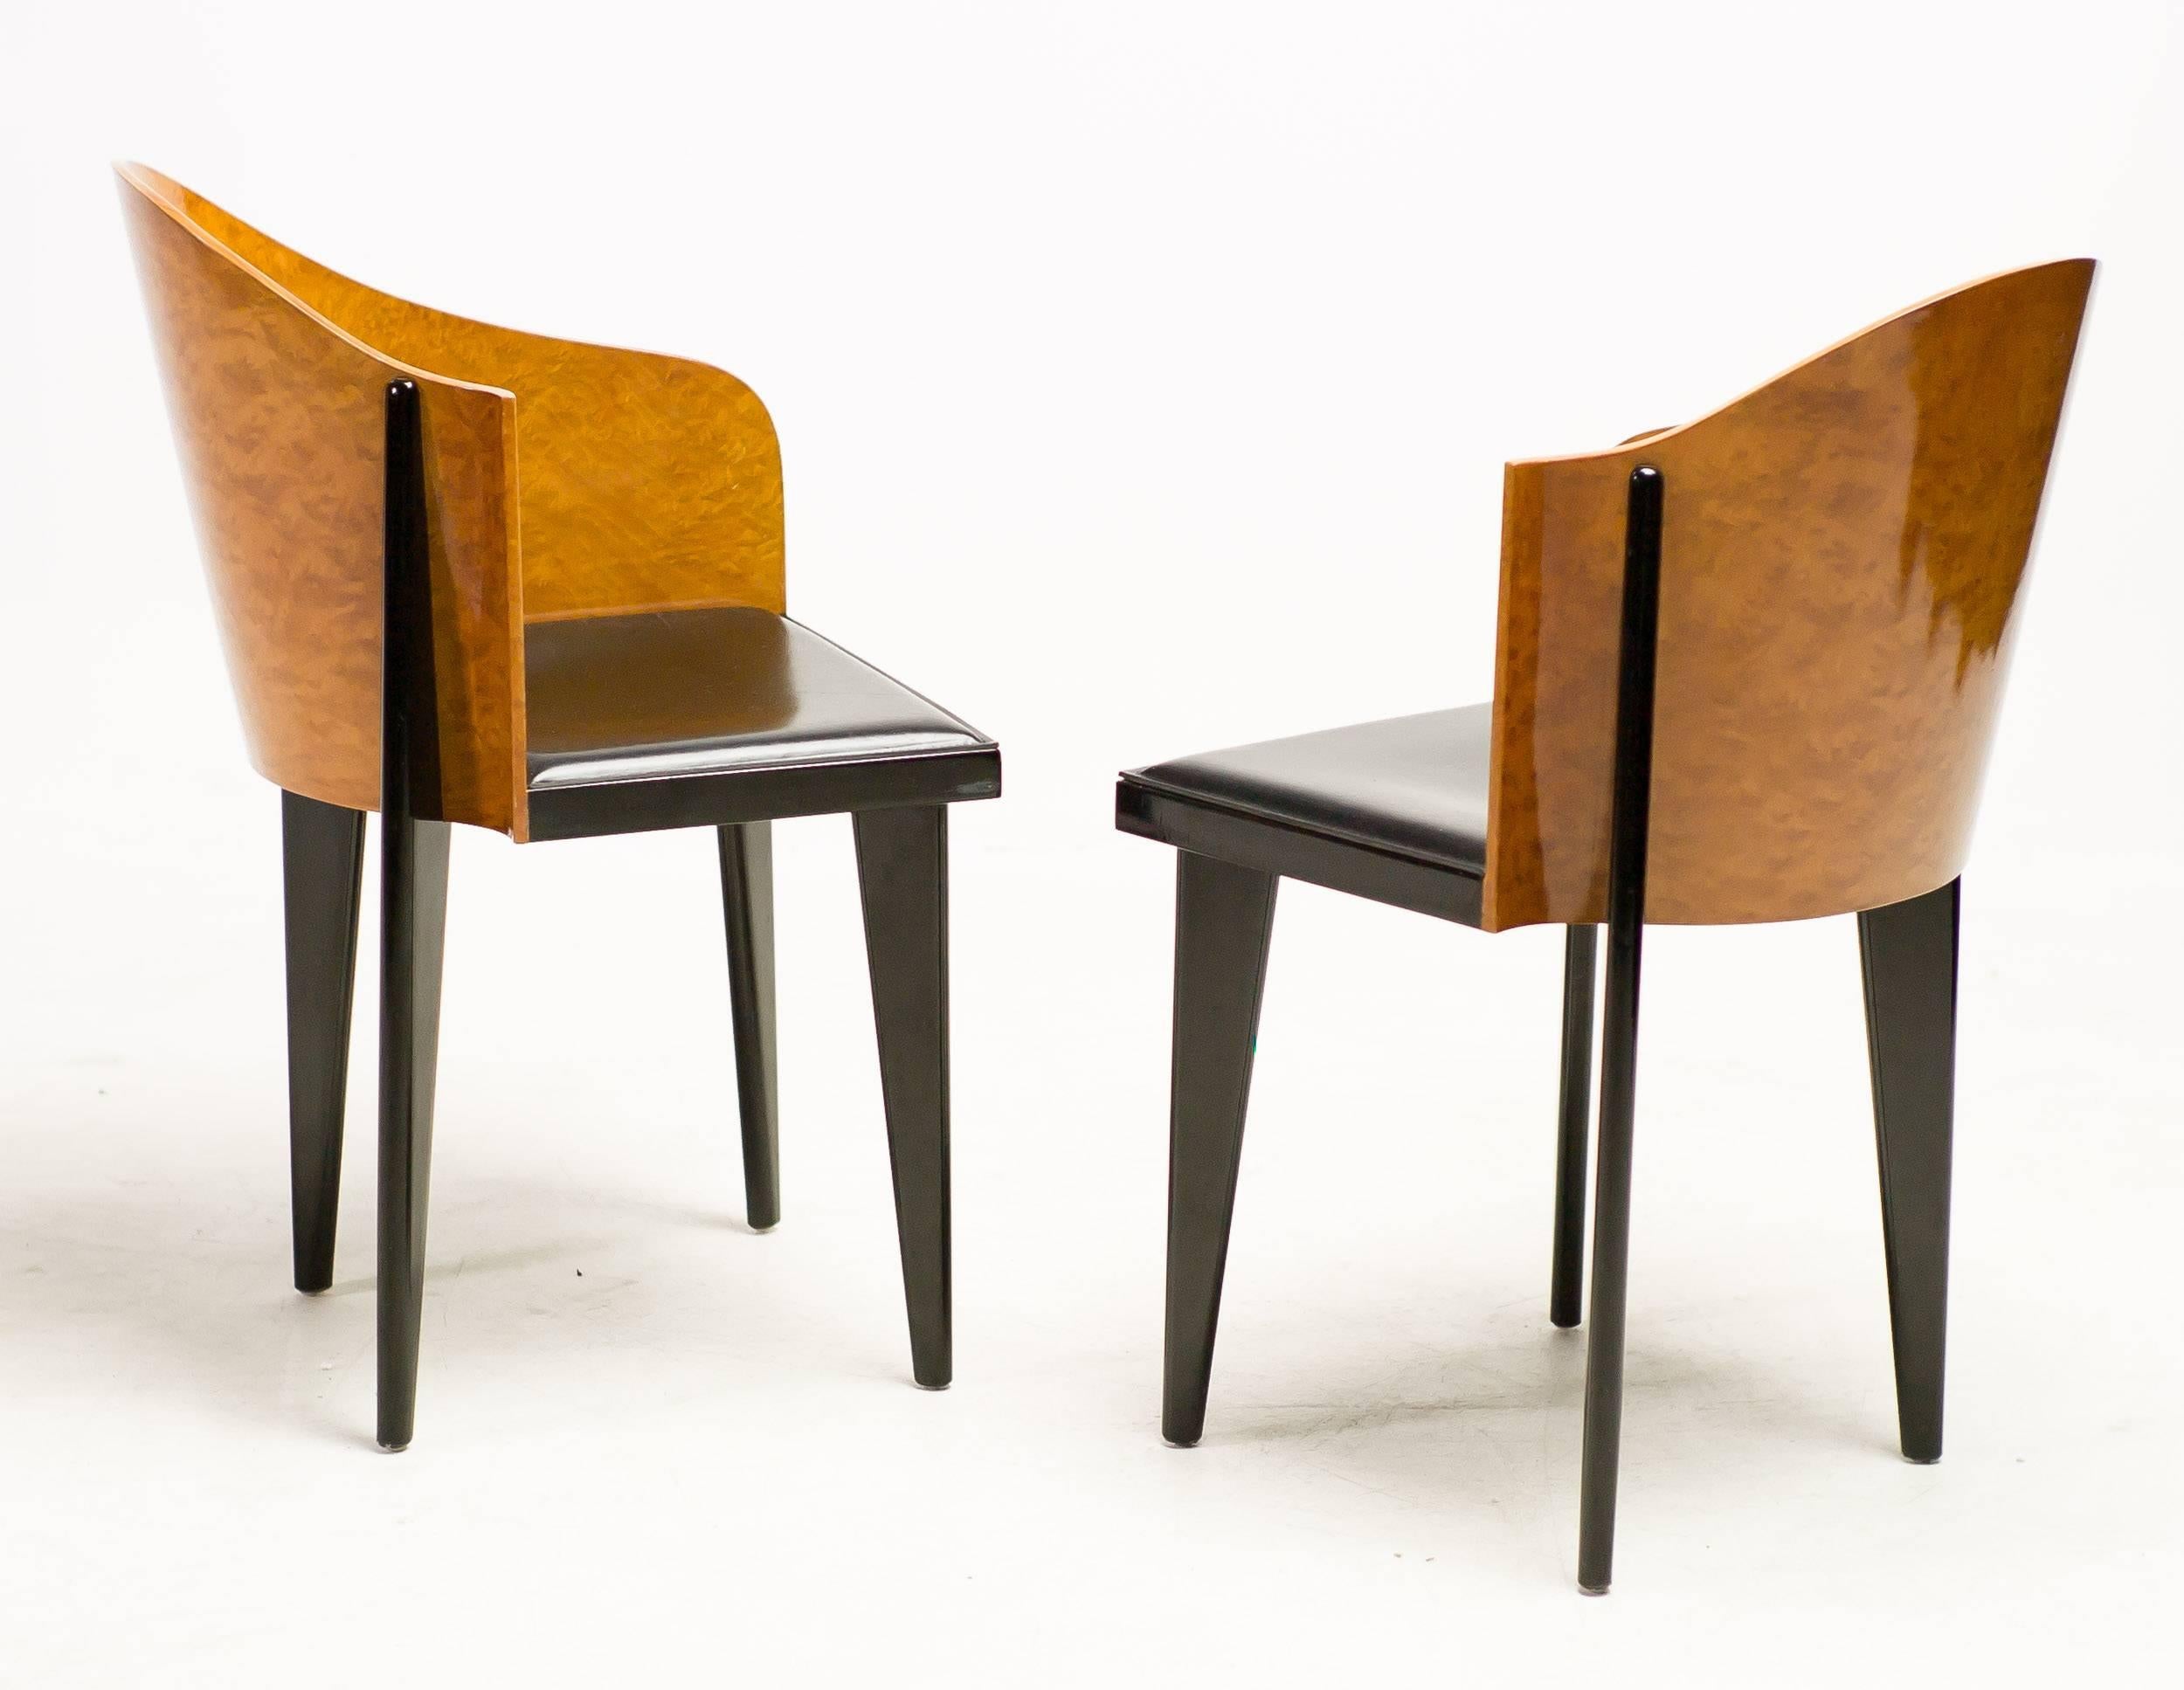 Lacquered Toscana Chairs Designed by Piero Sartogo for Saporiti